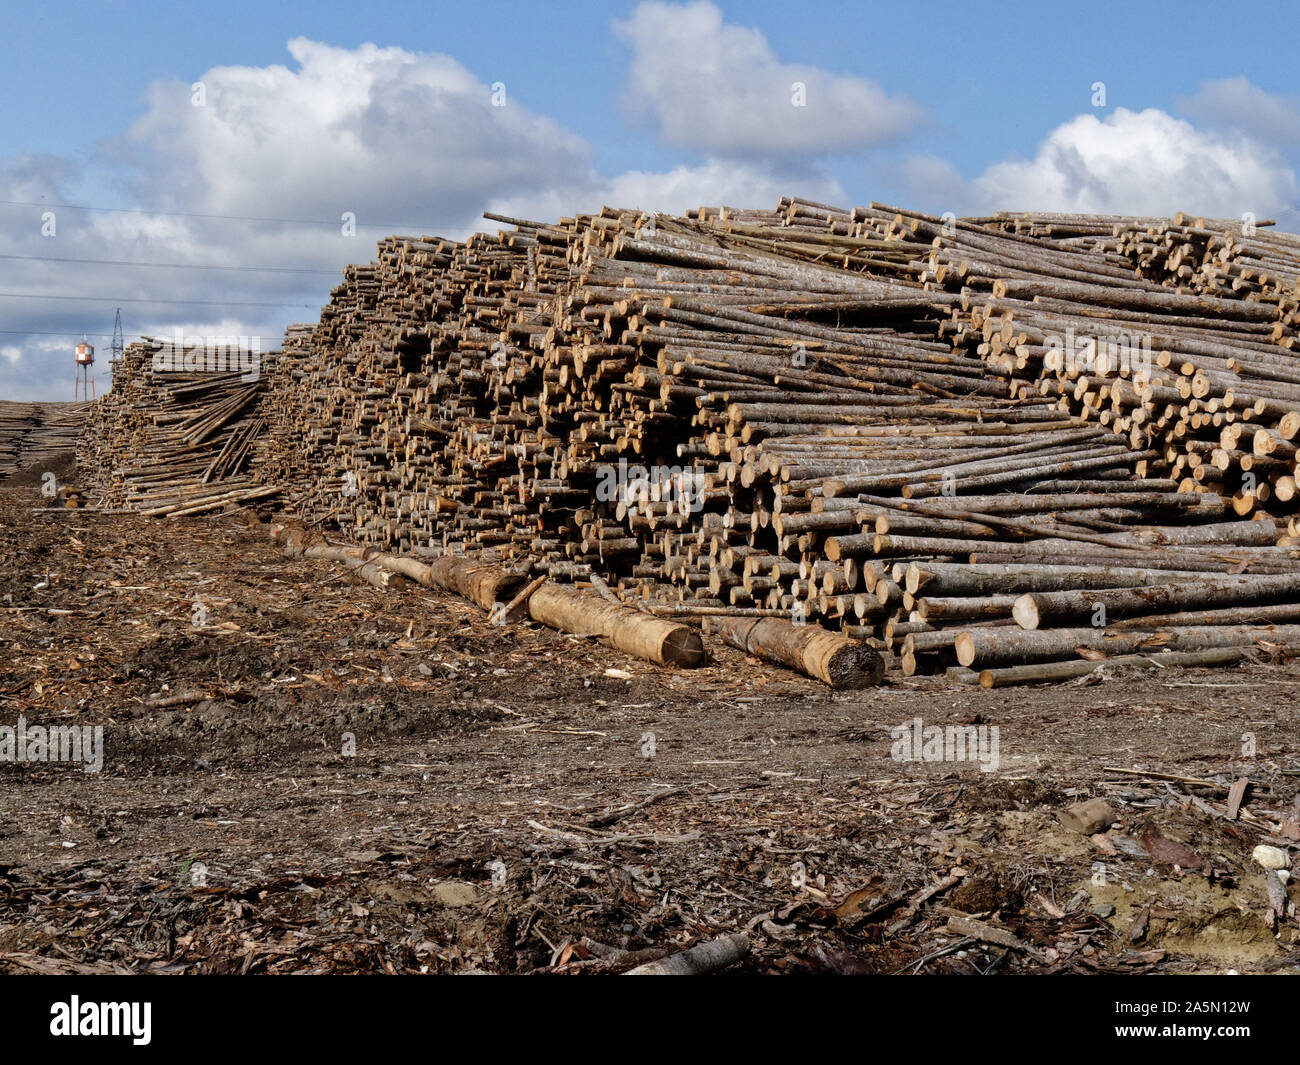 Huge piles of cut trees in a wood processing plant in teh Saguenay Lac St Jean area of Quebec, Canada Stock Photo